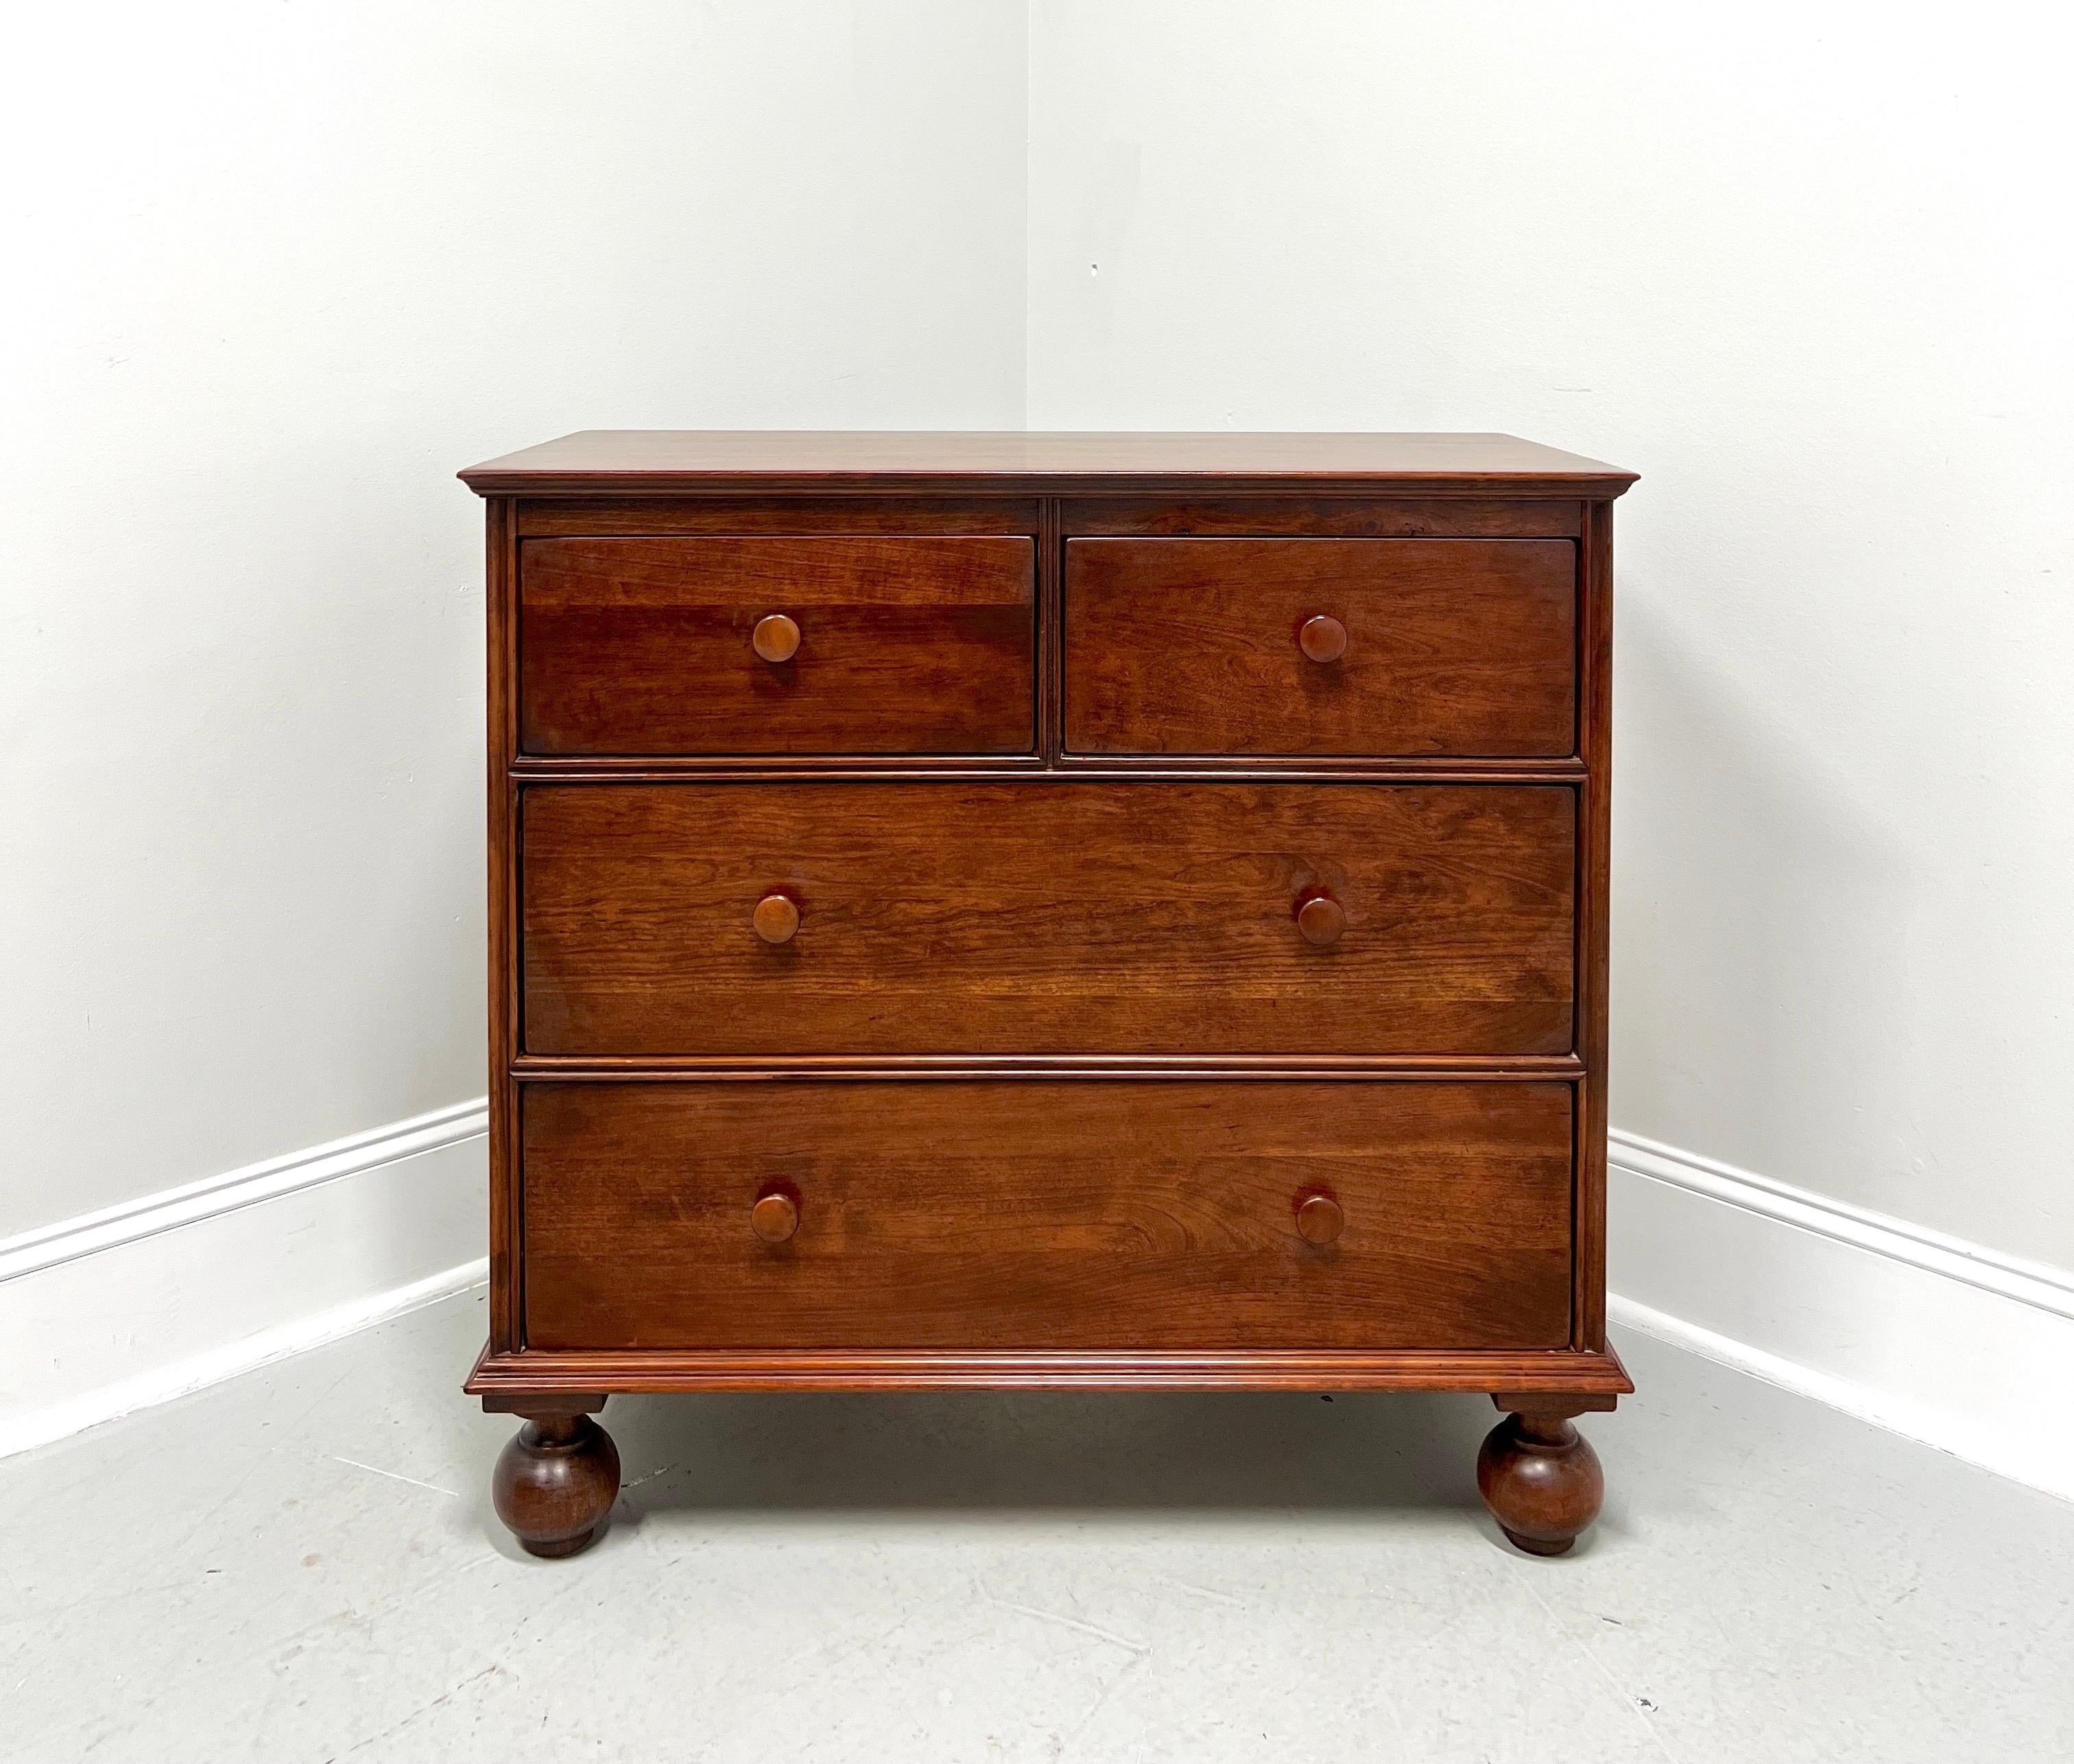 A bachelor chest in the Georgian style by Lexington Furniture, the 